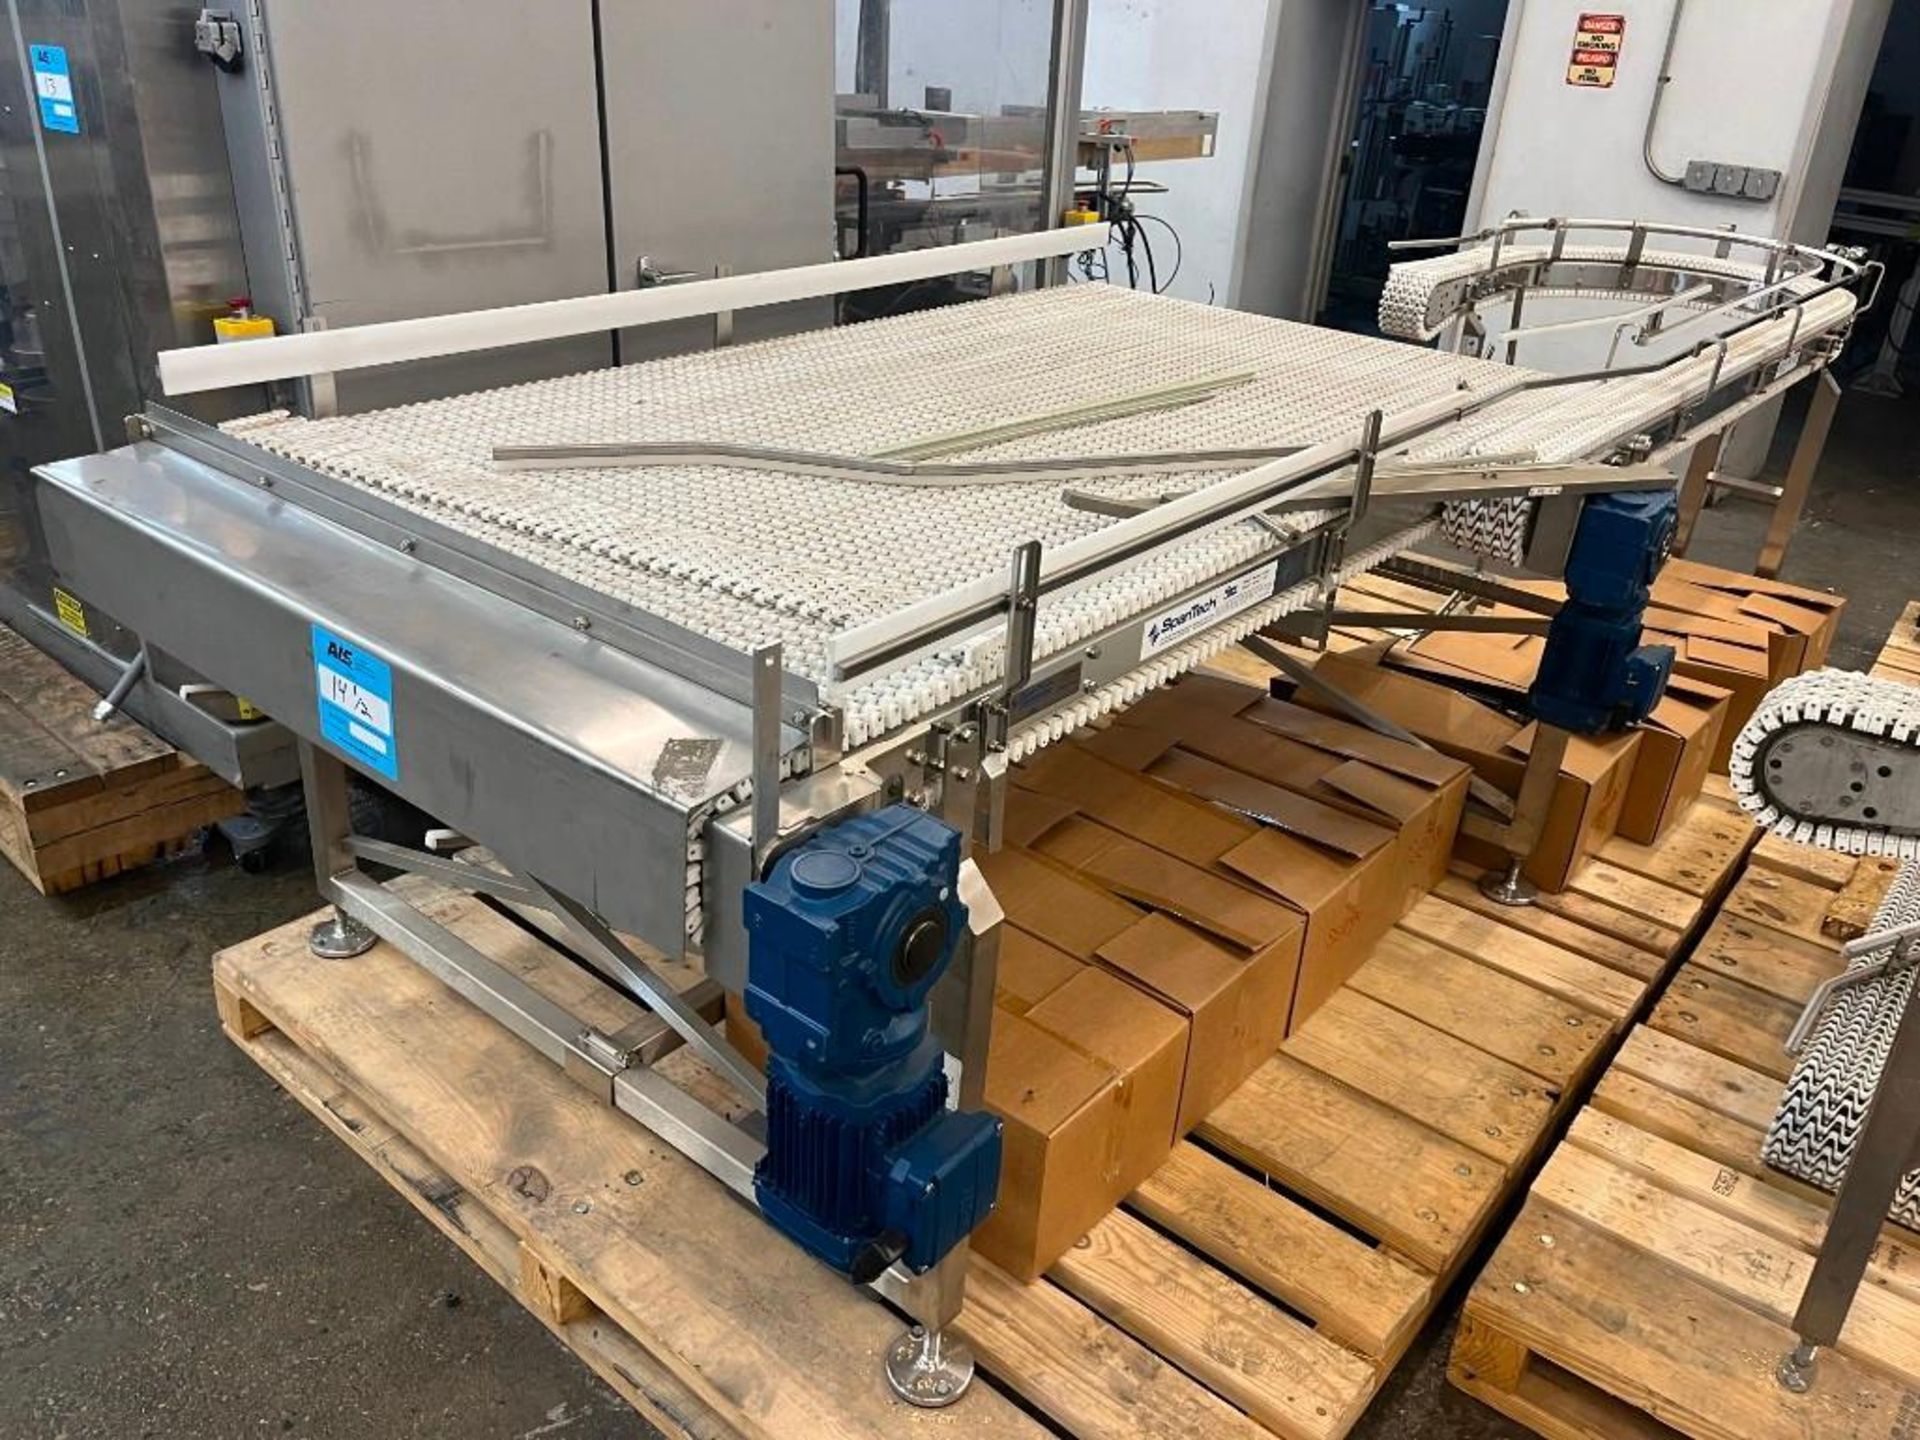 Spantech Flexlink Conveyor System and Linear Accumulation Table, S/N: 2254000325. Stainless steel co - Image 17 of 21